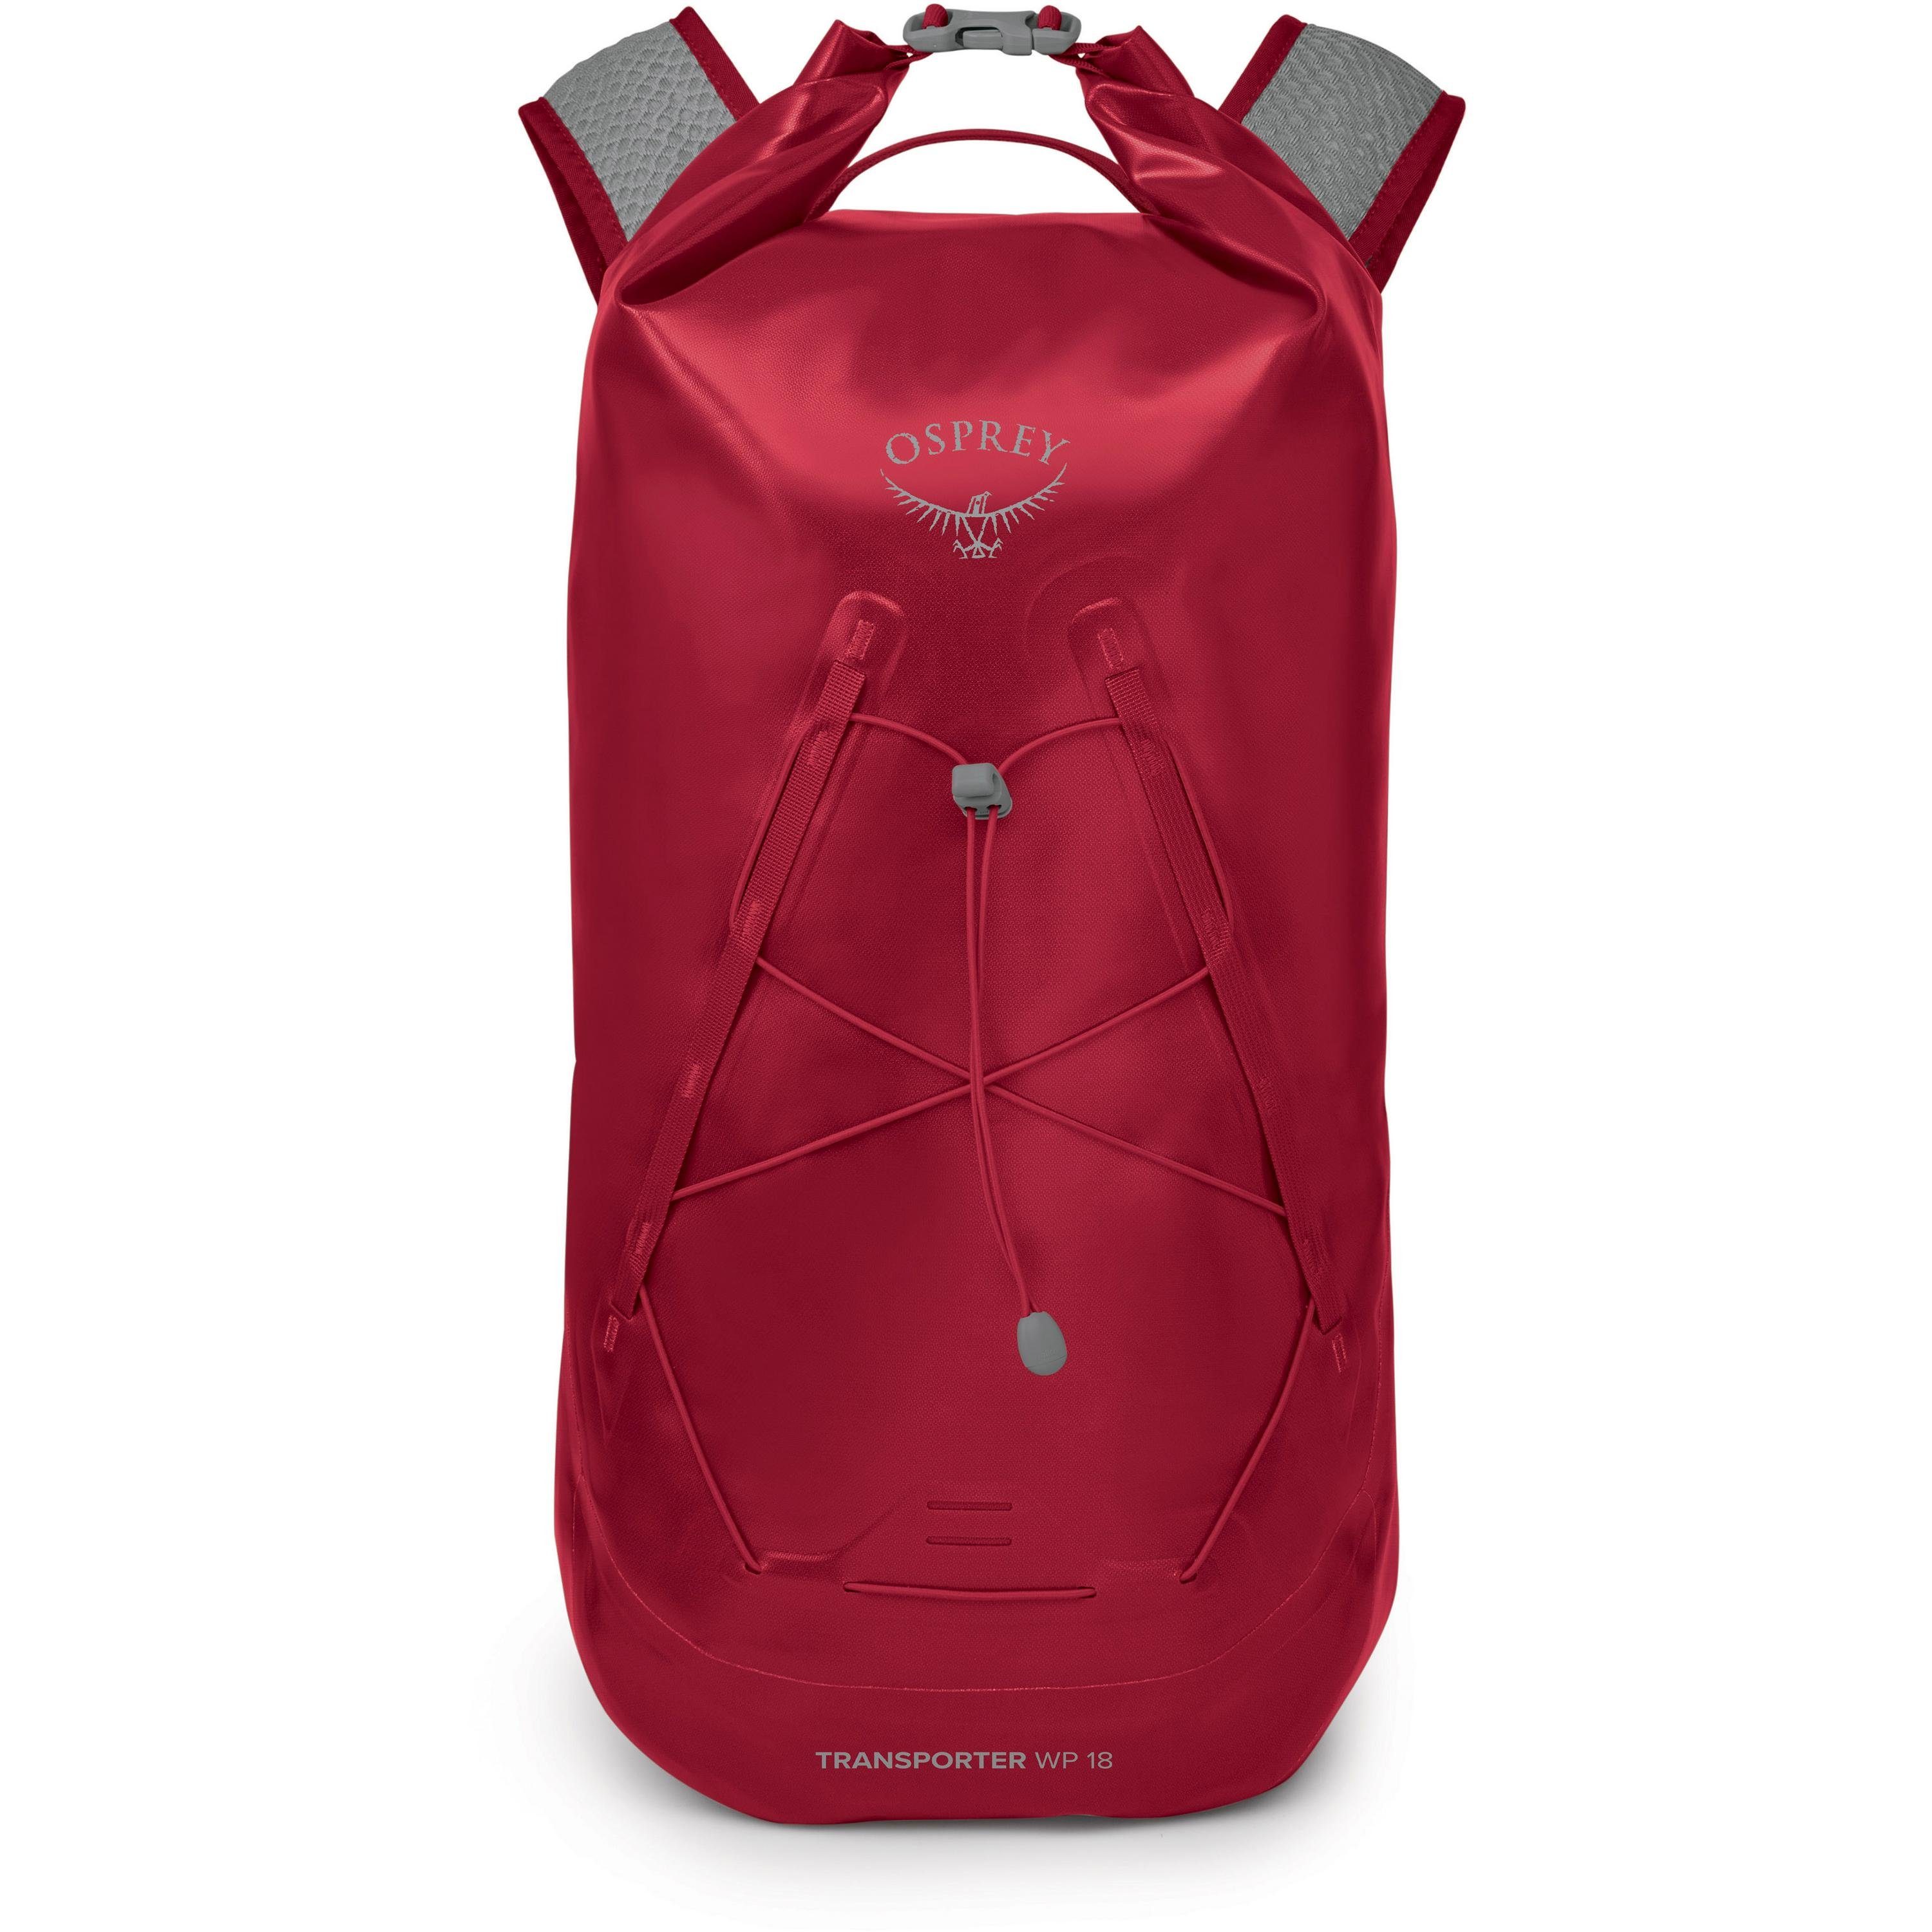 Osprey Daypack TRANSPORTER ROLL TOP WP 18 poinsettia red